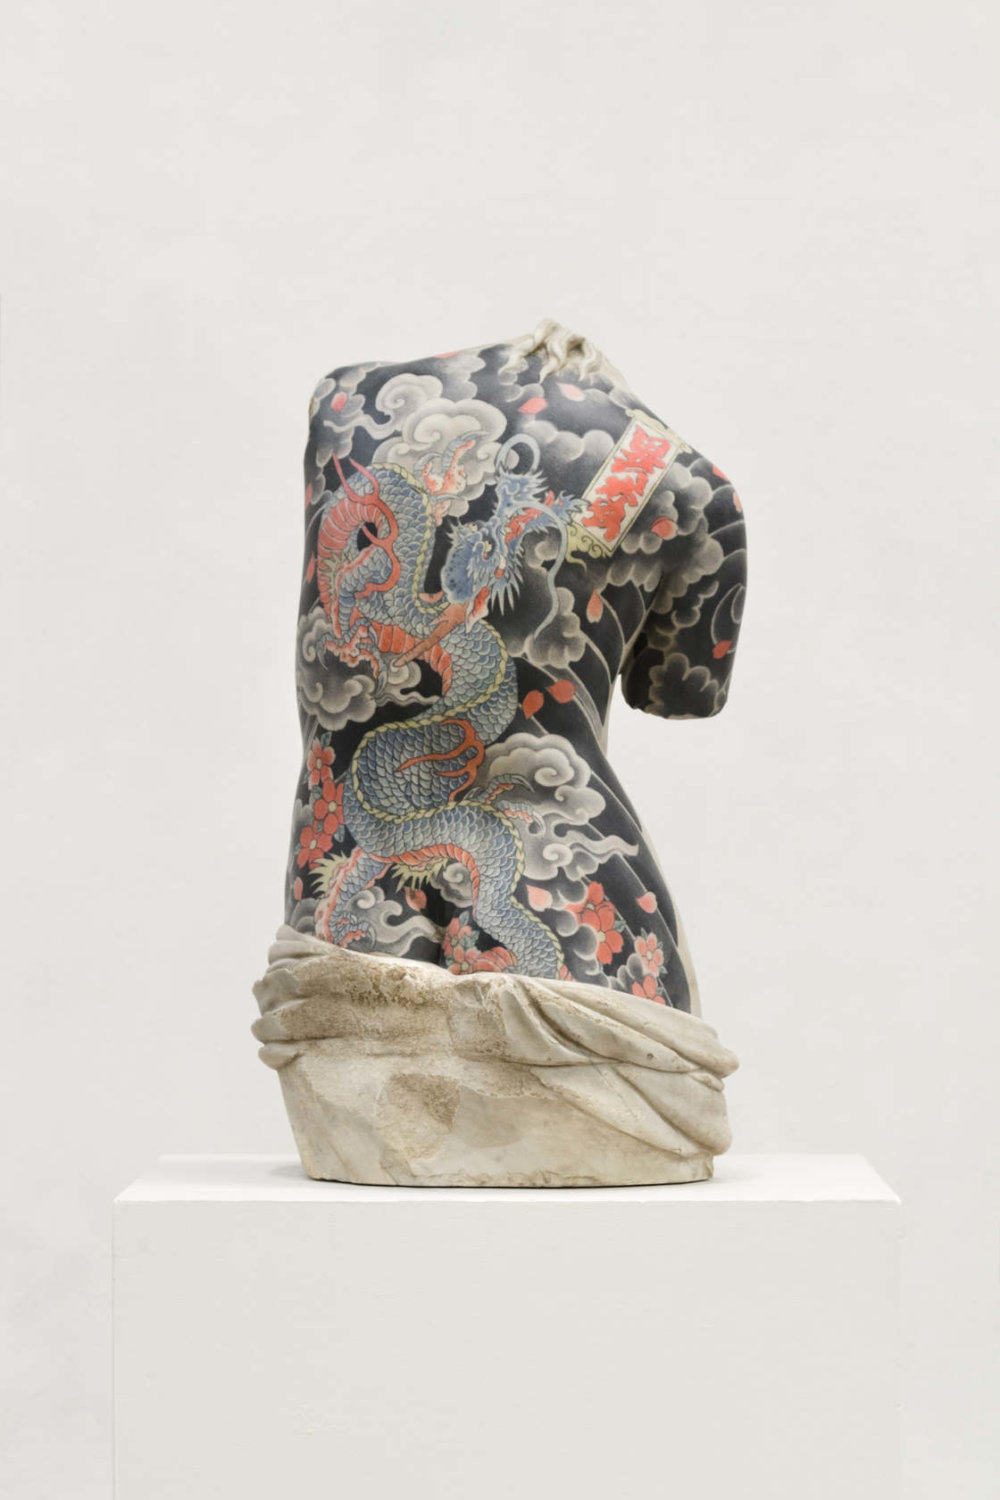 Classical Marble Sculptures Covered With Traditional Far Eastern Tattoos By Fabio Viale 9